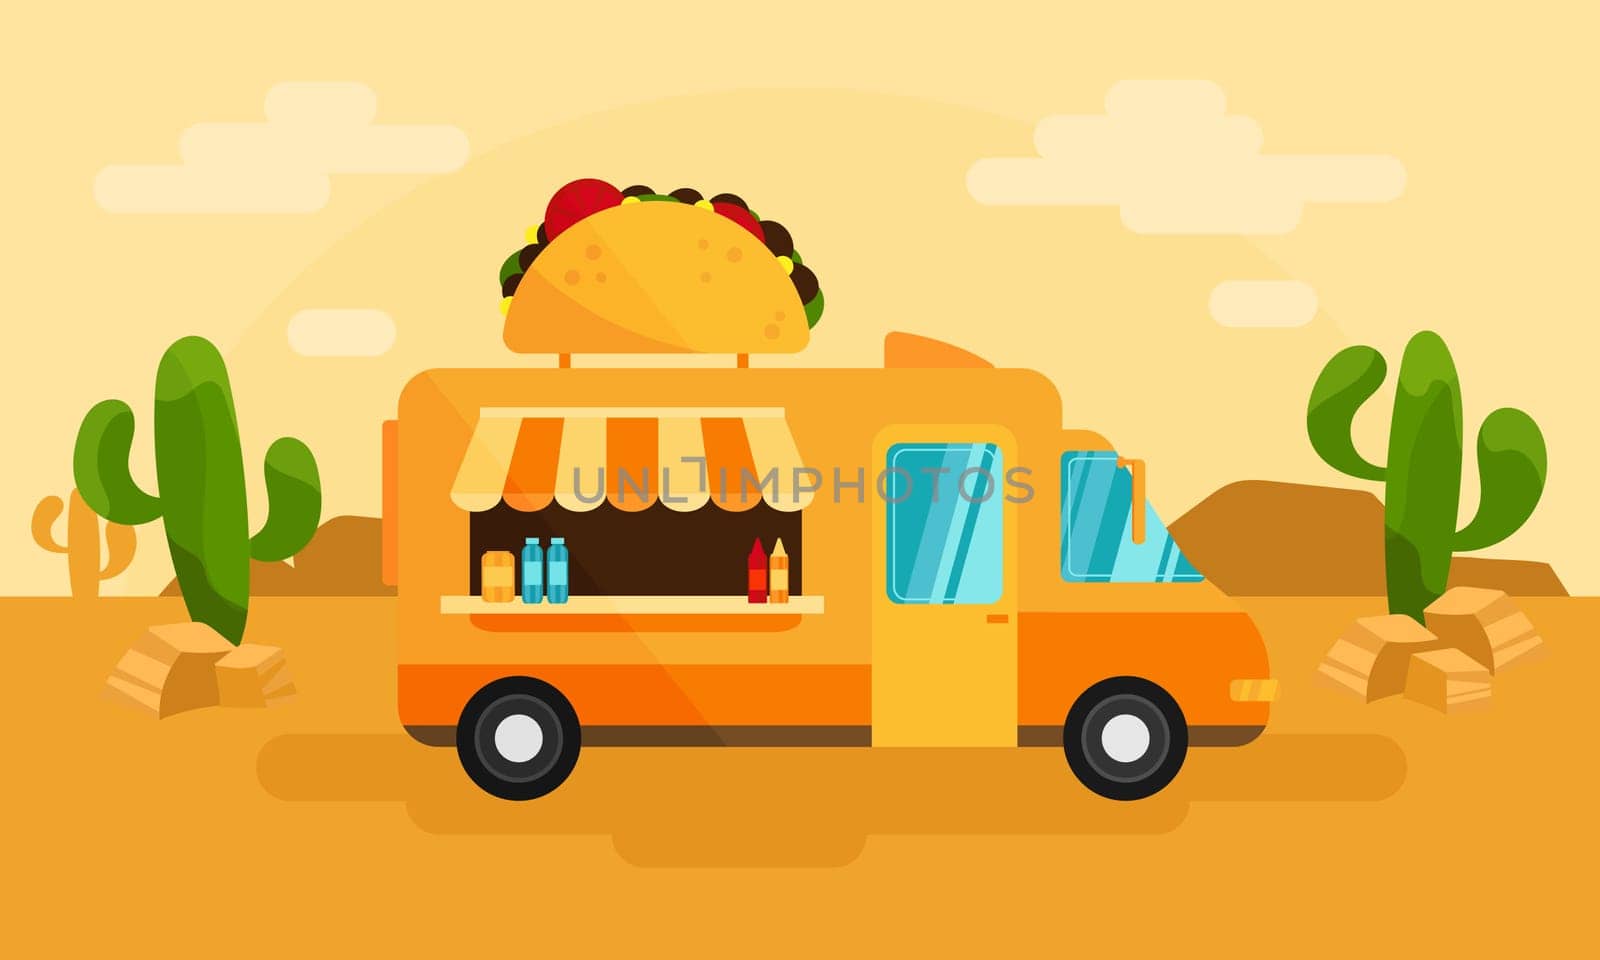 Food truck or Mexican meal. Delivery service or summer food festival. Truck van with Mexican taco. Vector landscape with cactus, desert. Cartoon style